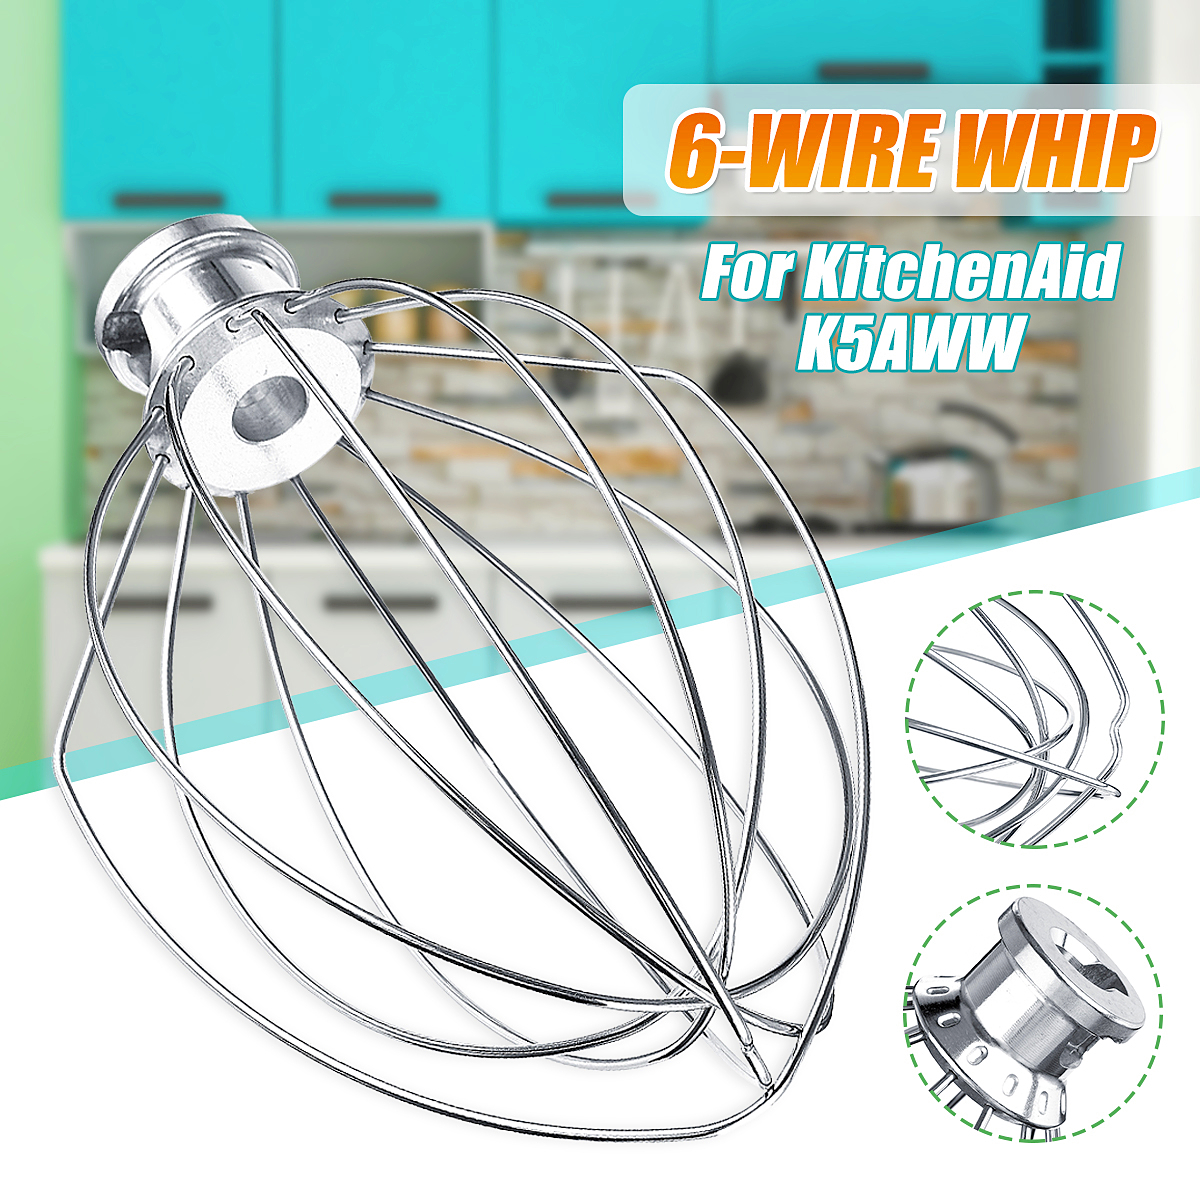 6-Wire-Whip-Whisk-Beater-Mixer-Stainless-Steel-Silver-For-KitchenAid-K5AWW-KSM90-1731695-1